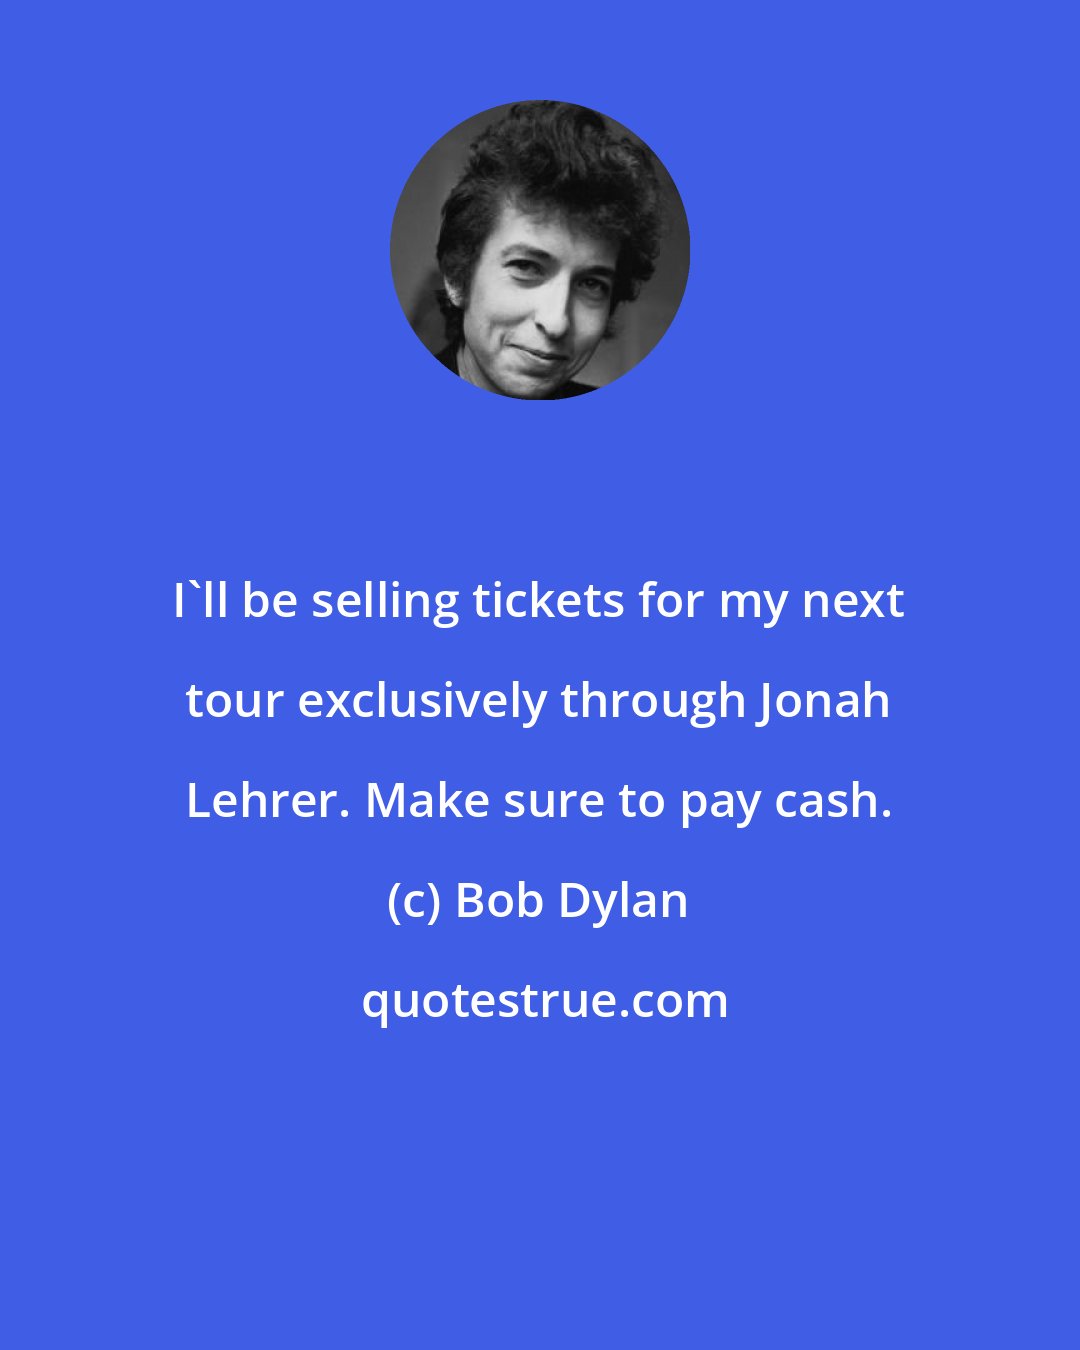 Bob Dylan: I'll be selling tickets for my next tour exclusively through Jonah Lehrer. Make sure to pay cash.